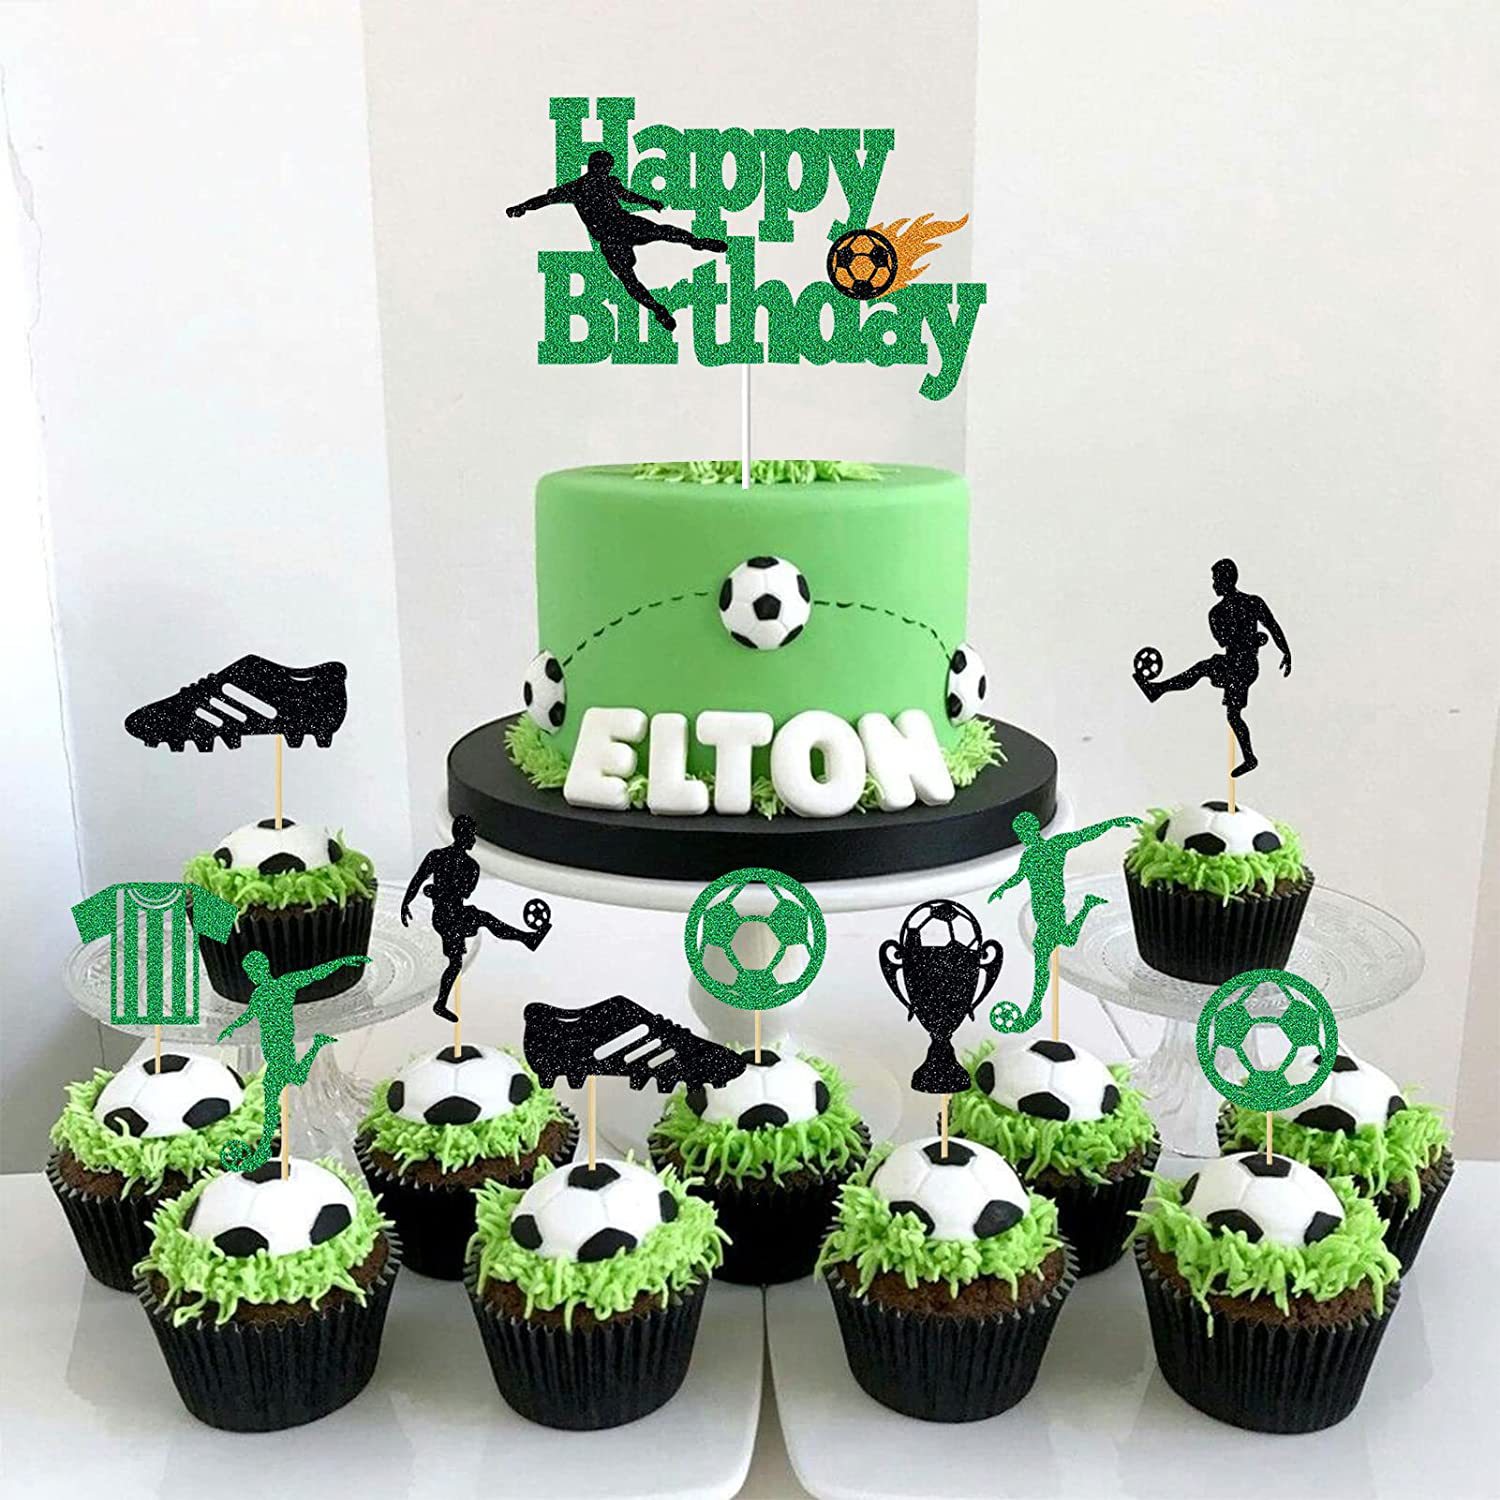 Two tier soccer field cake 双层足球场蛋糕 - Cube Bakery & Cafe